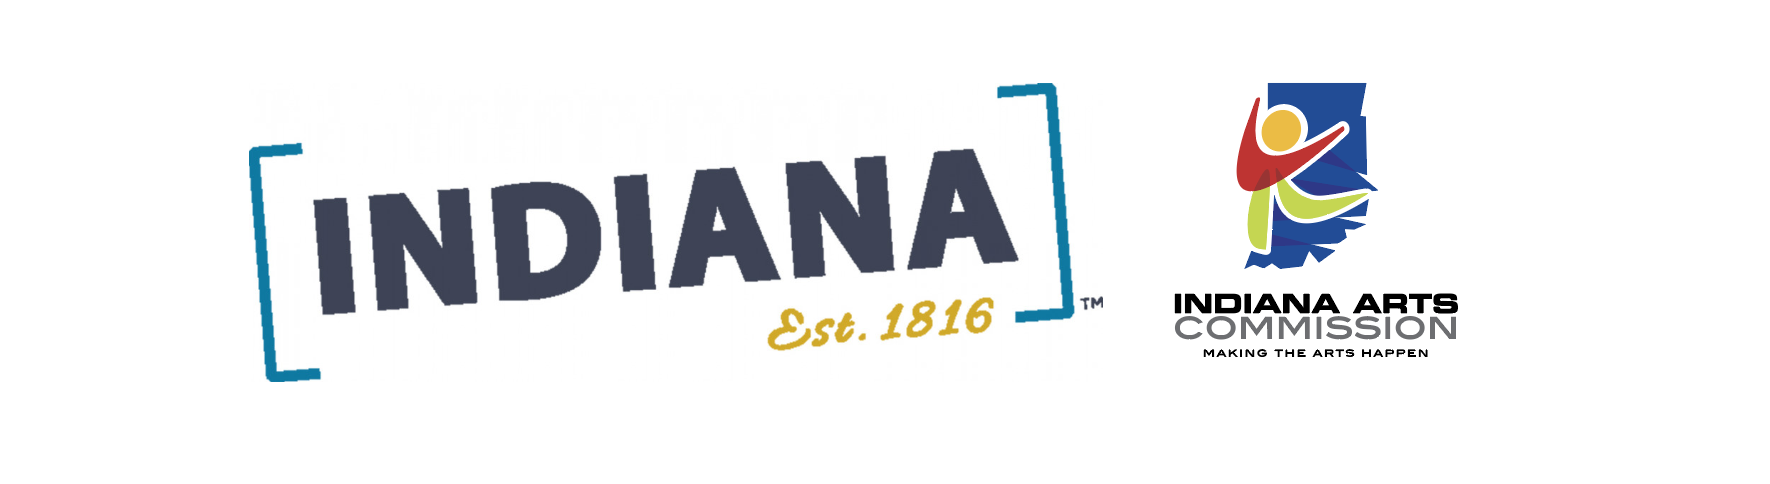 Visit Indiana and Indiana Arts Commission logos